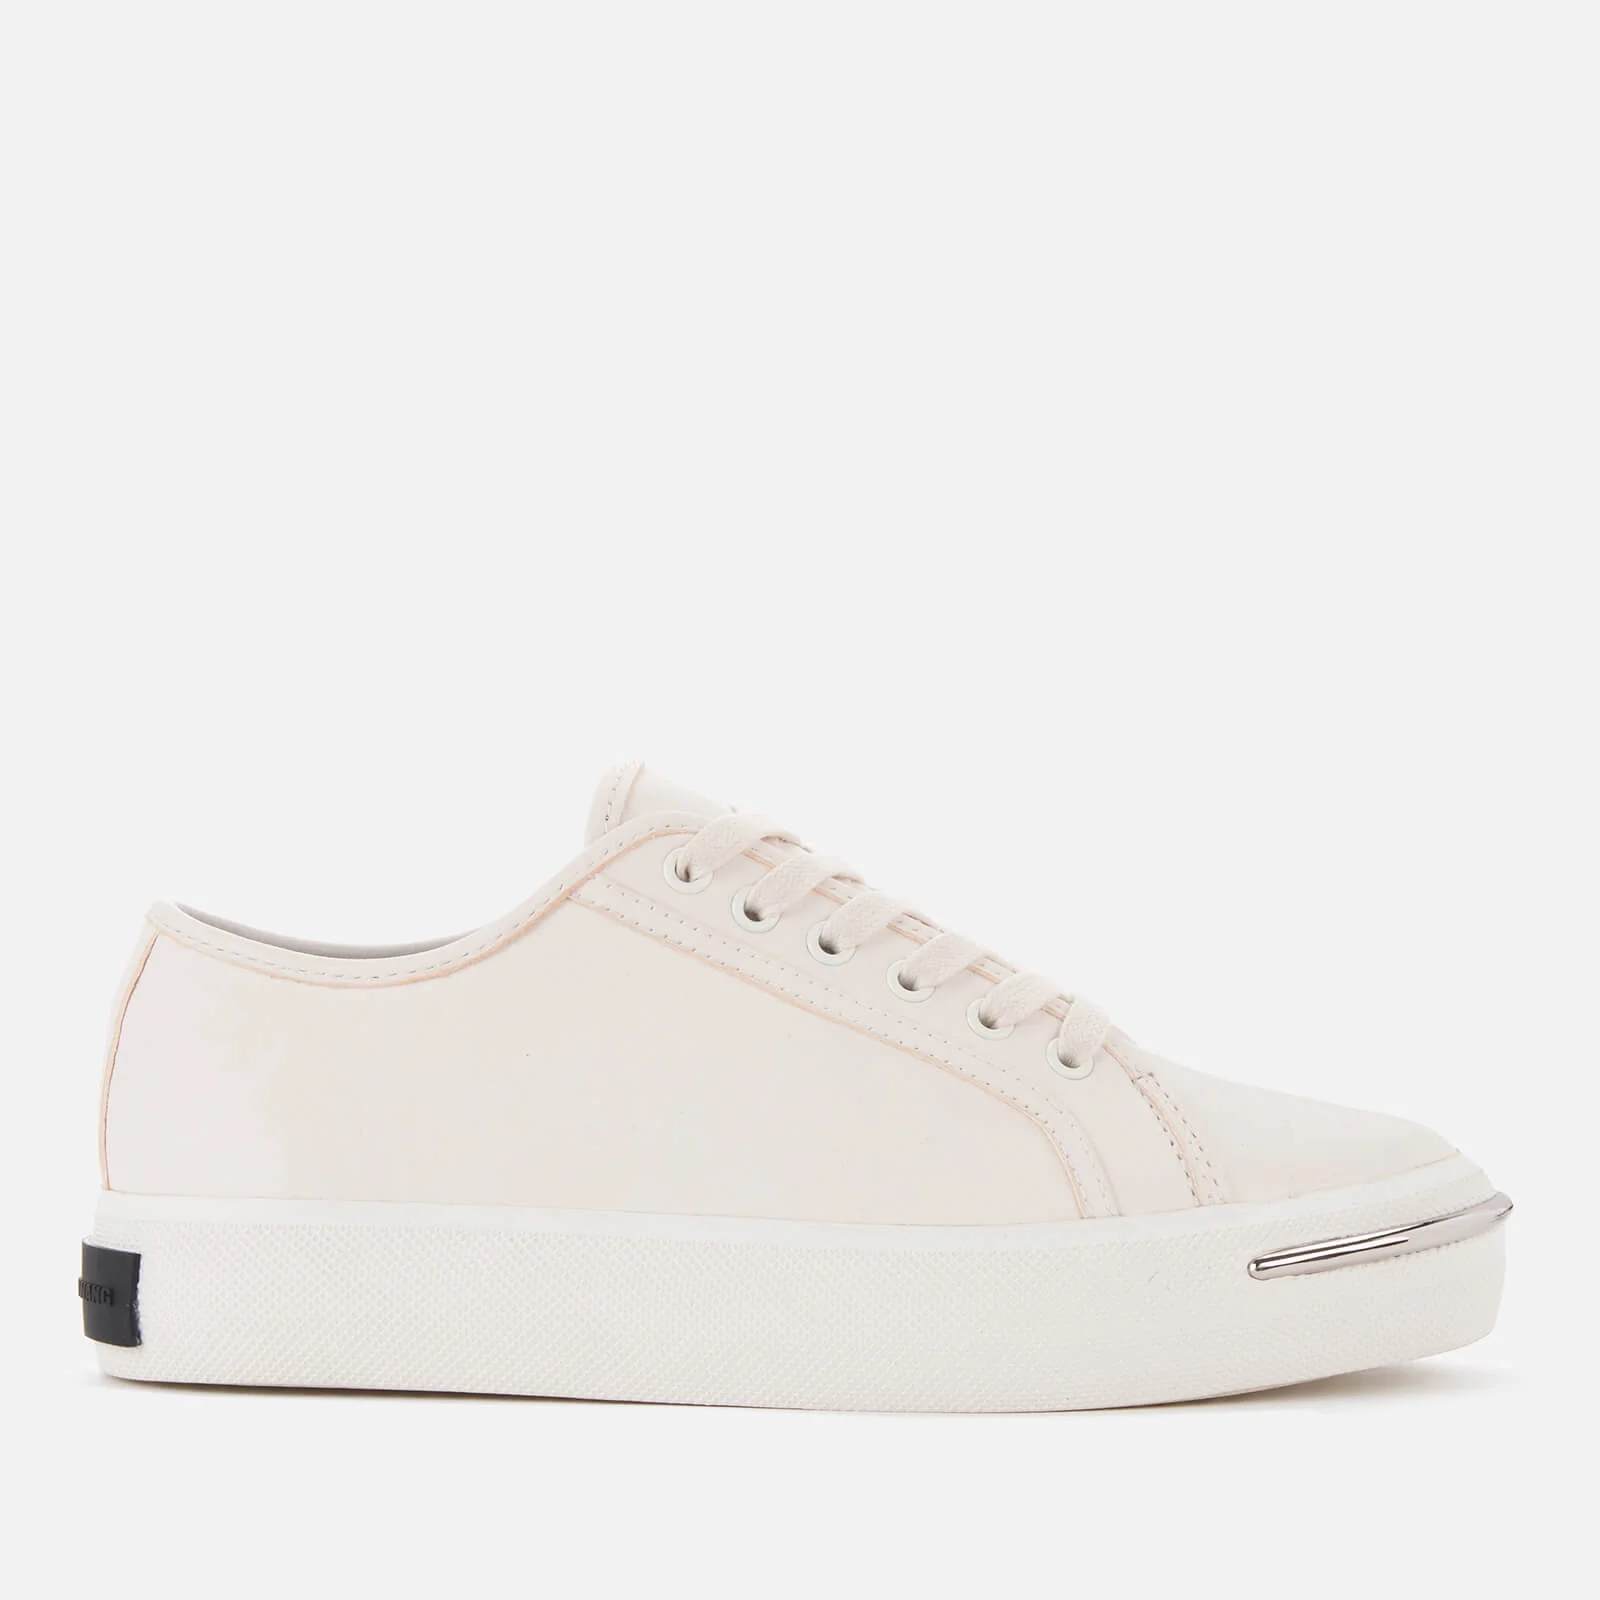 Alexander Wang Women's Pia Low Top Leather Trainers - White Image 1